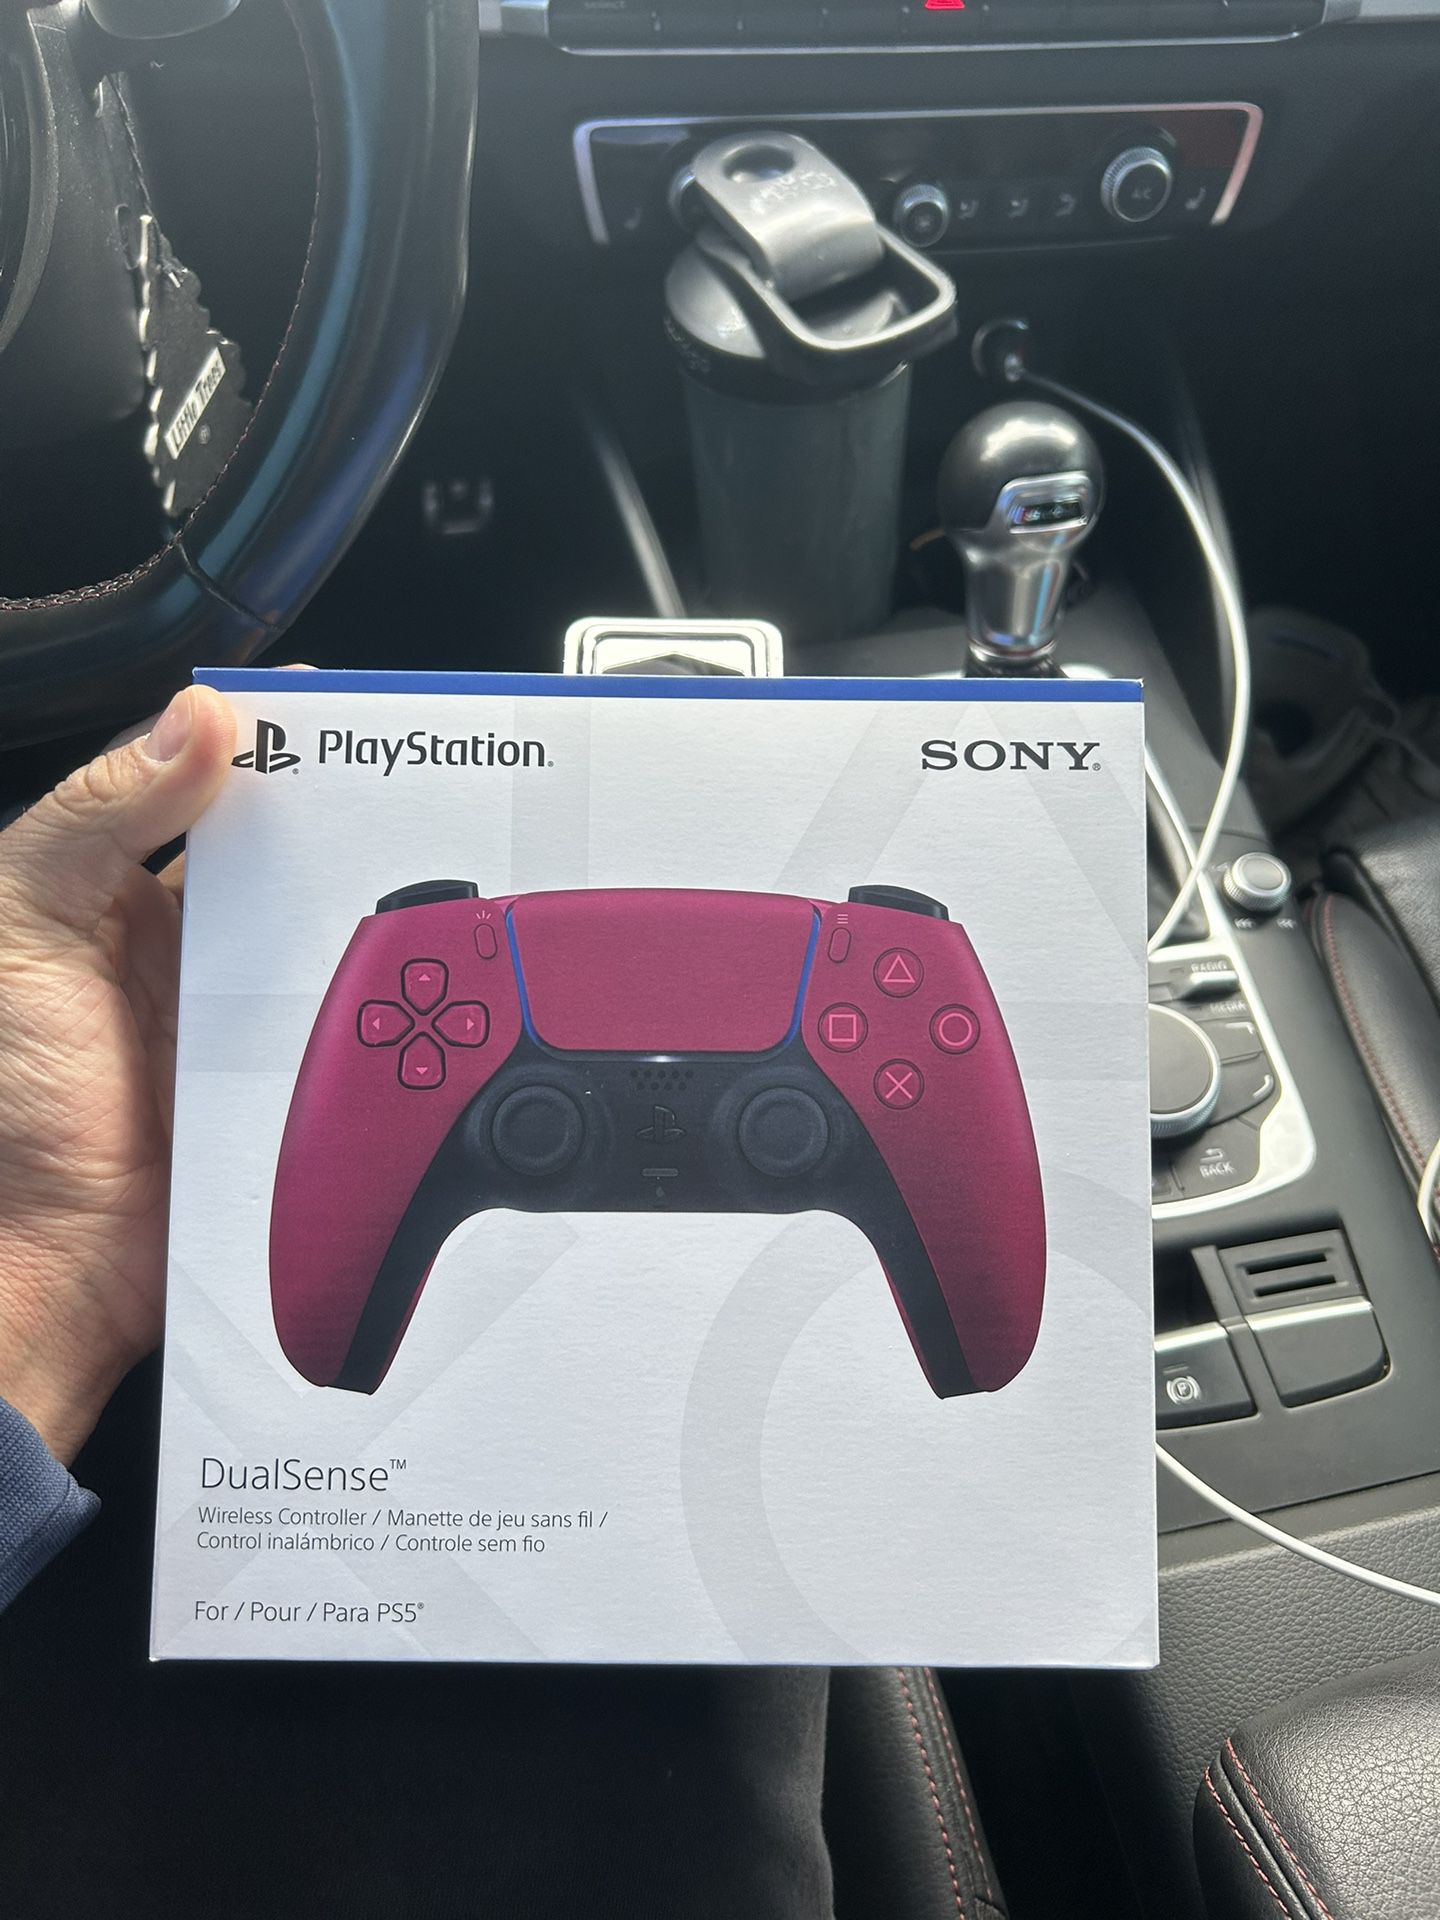 Brand New In box never used or opened PS5 controllers